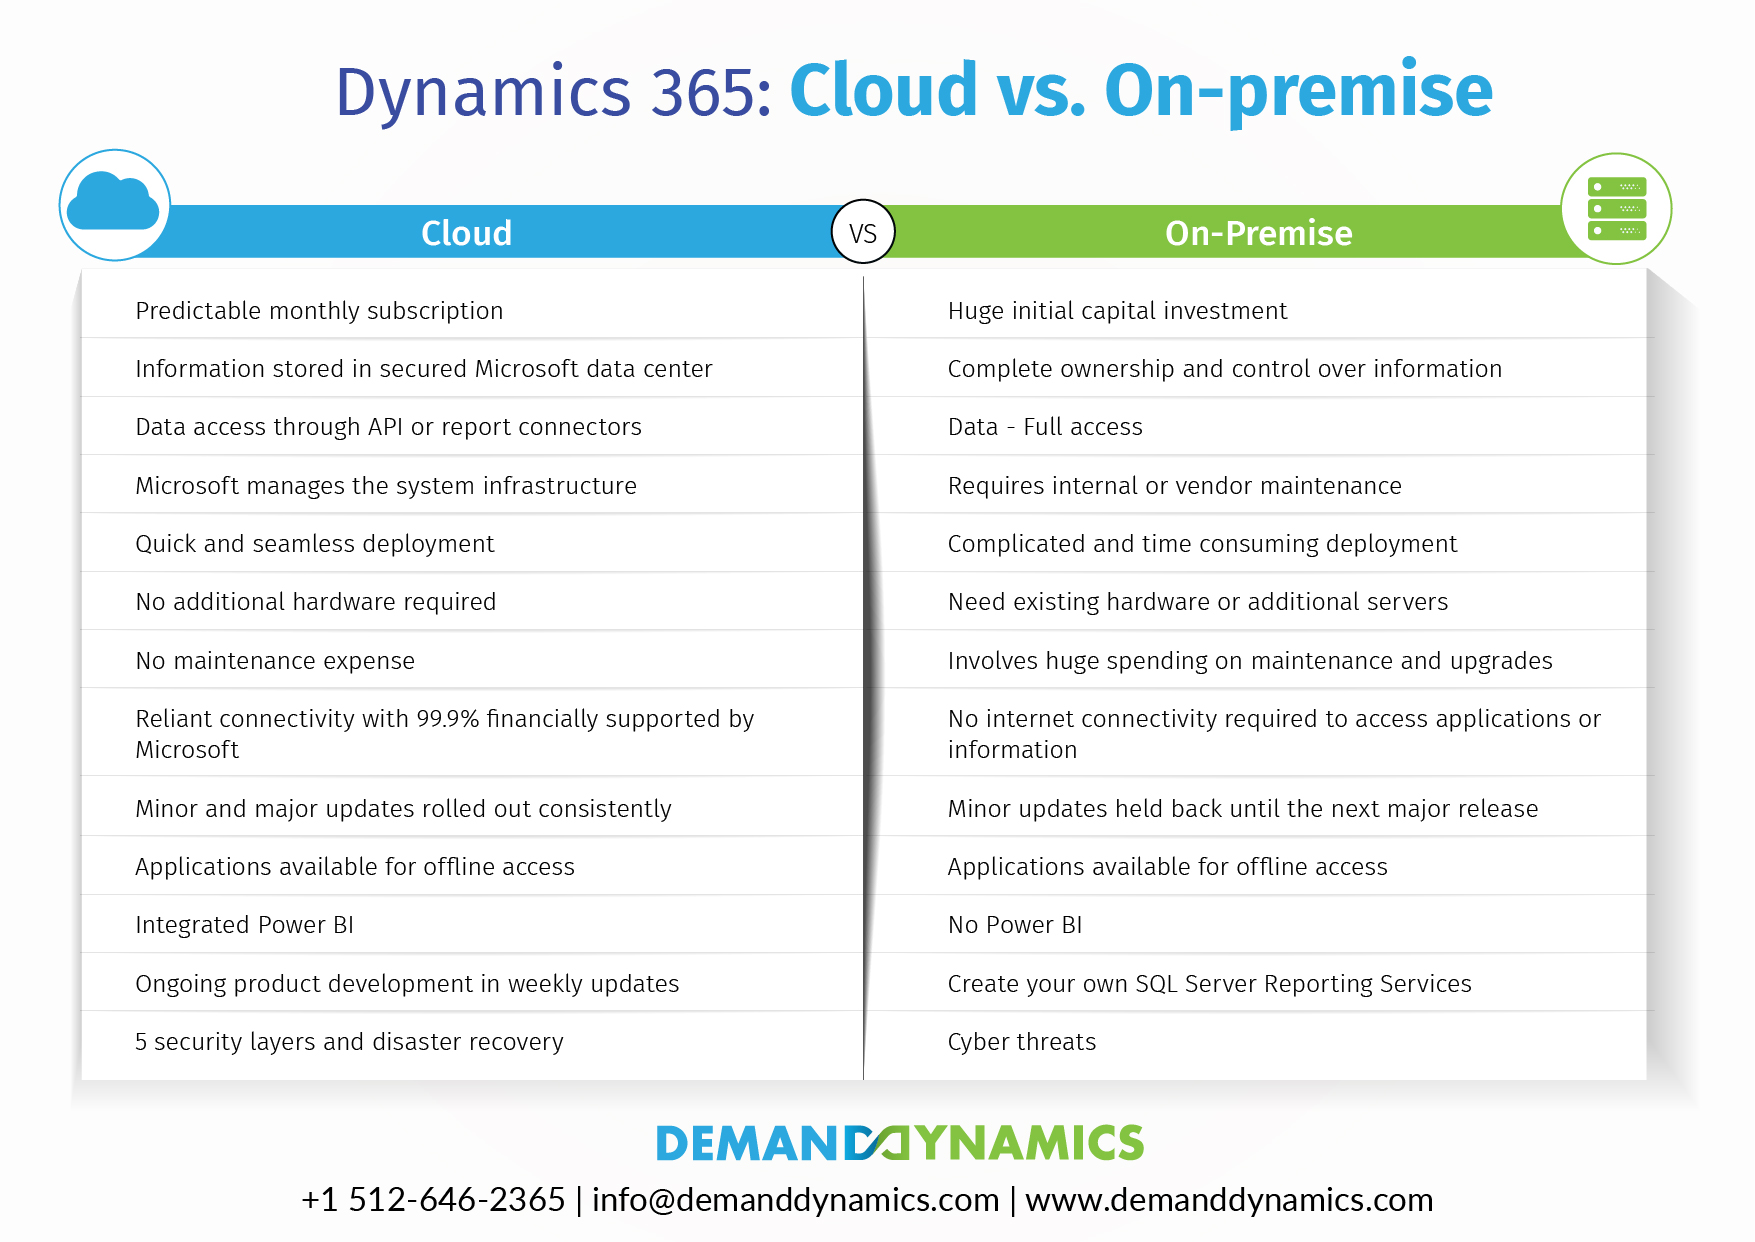 Comparison Chart Between Cloud and On-premise